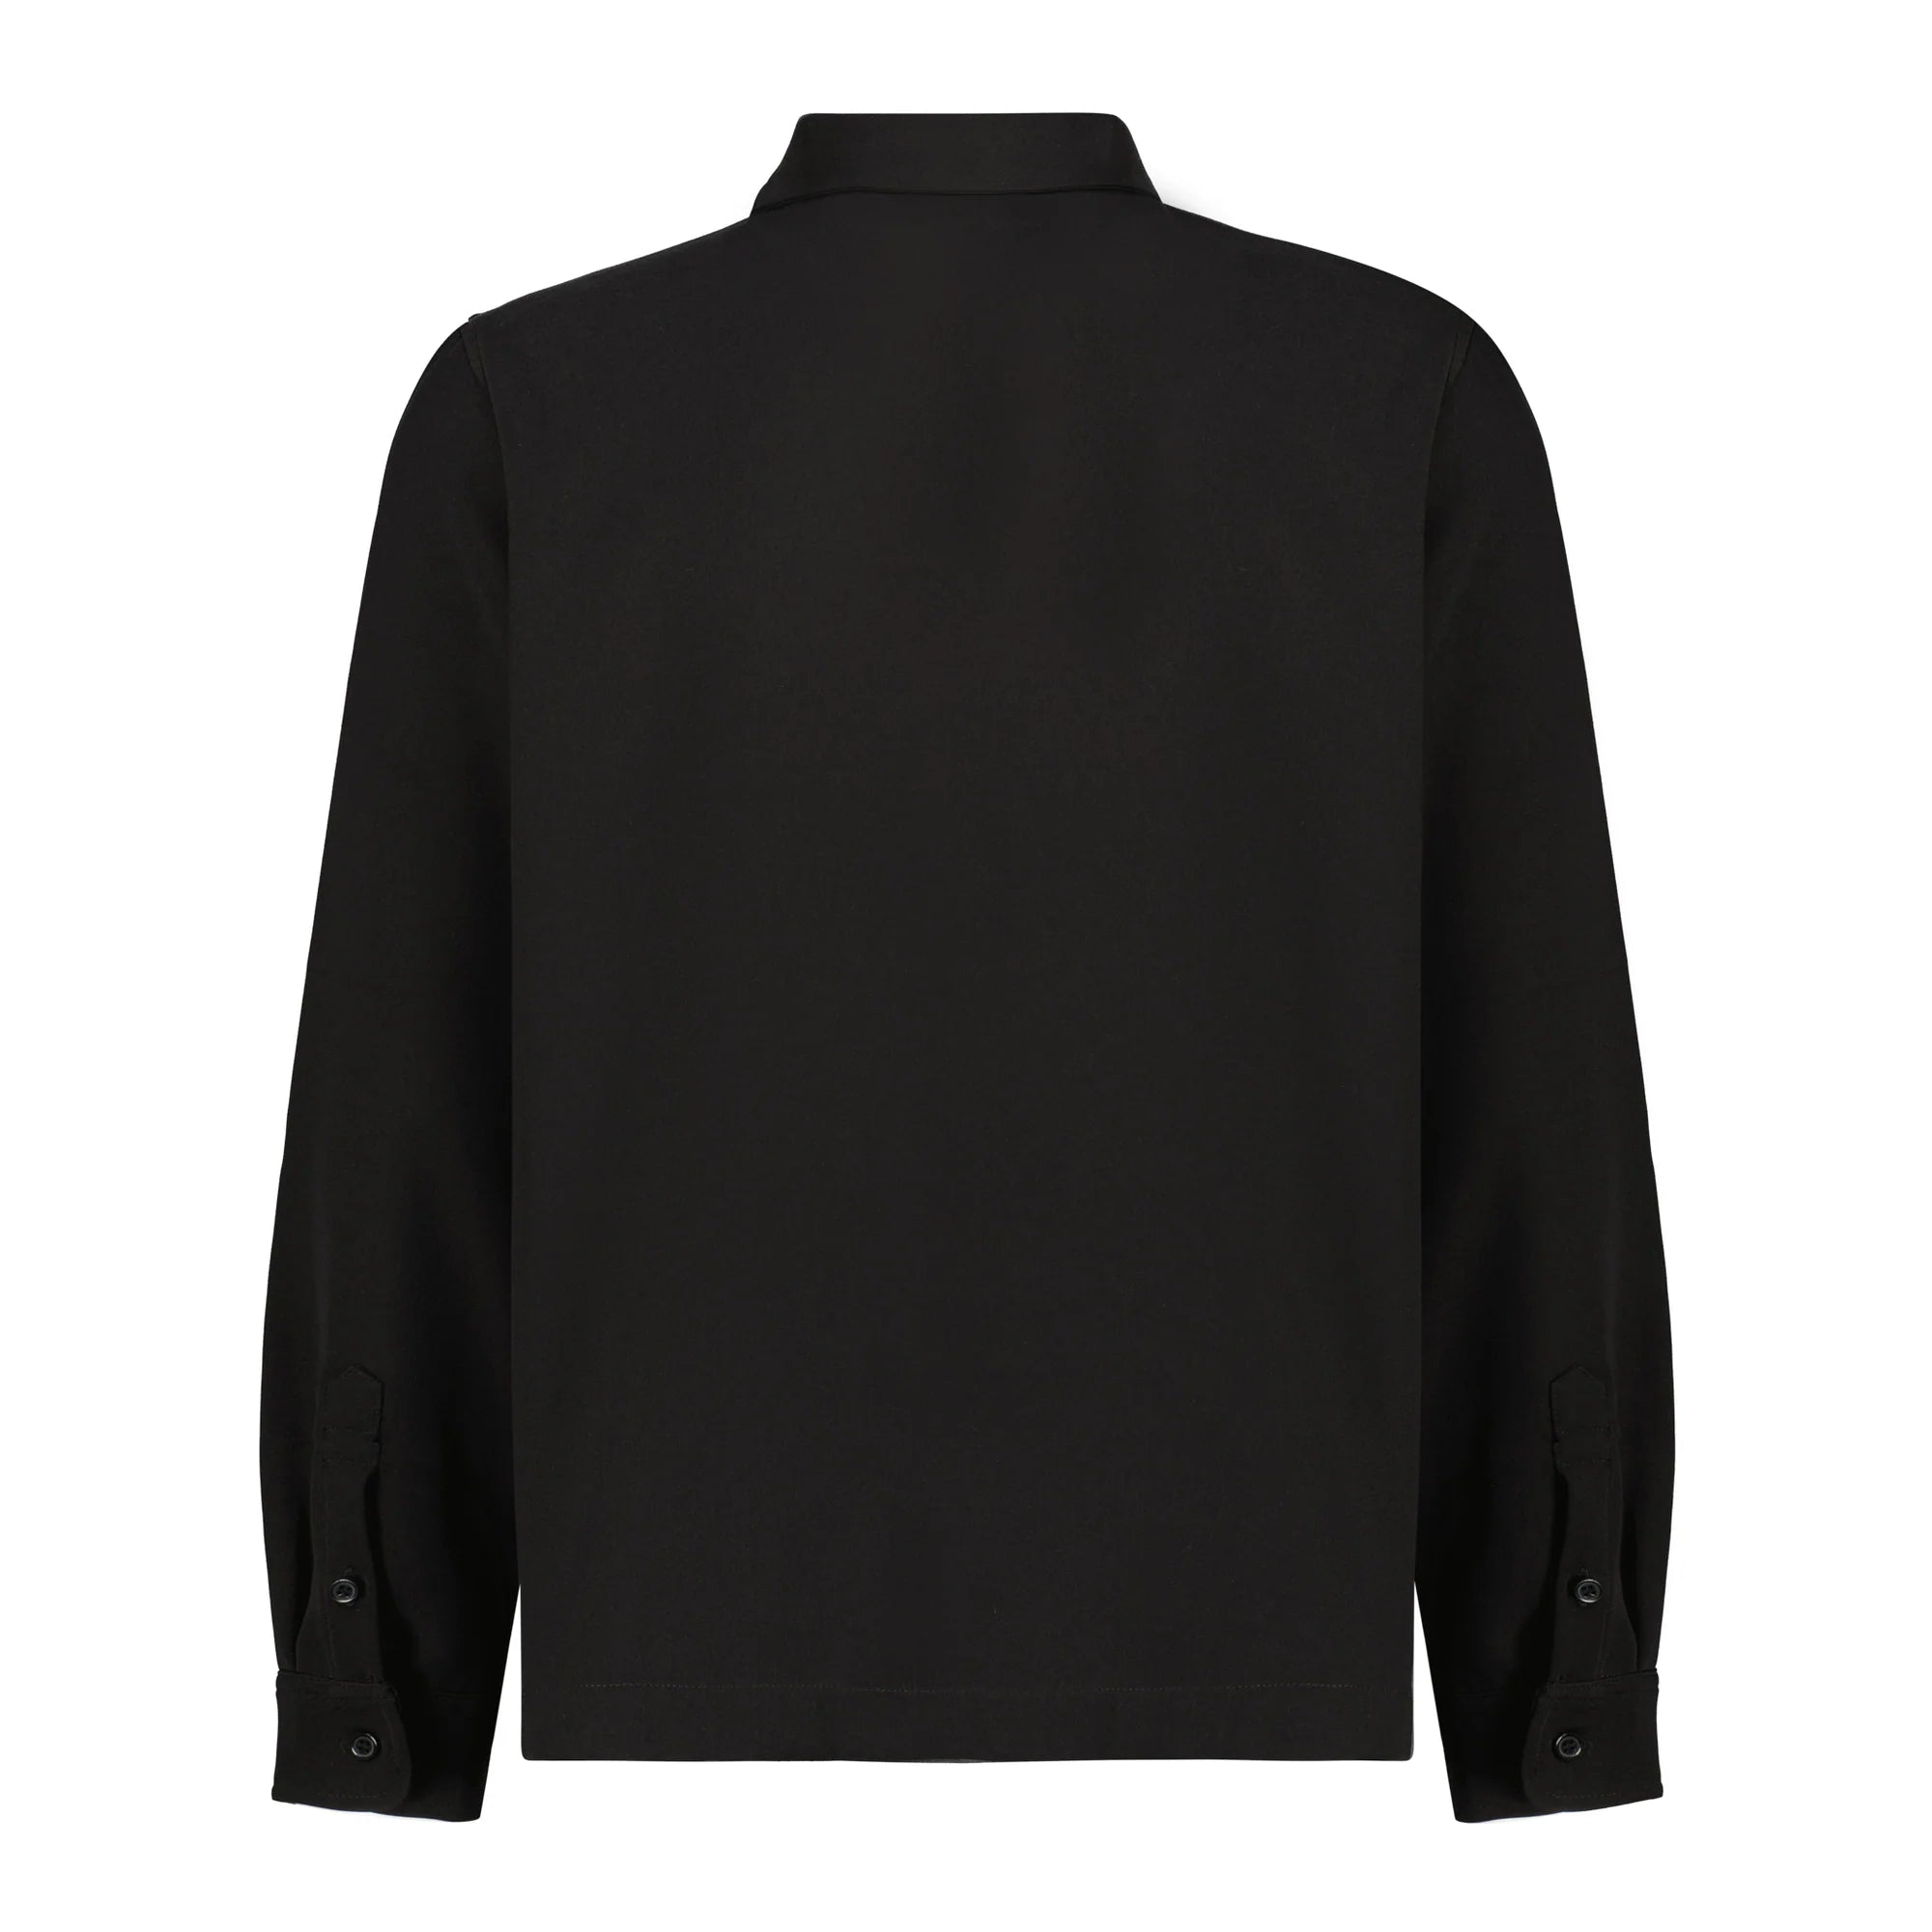 Personal Issues Long Sleeve Loose Fit Shirt - Black